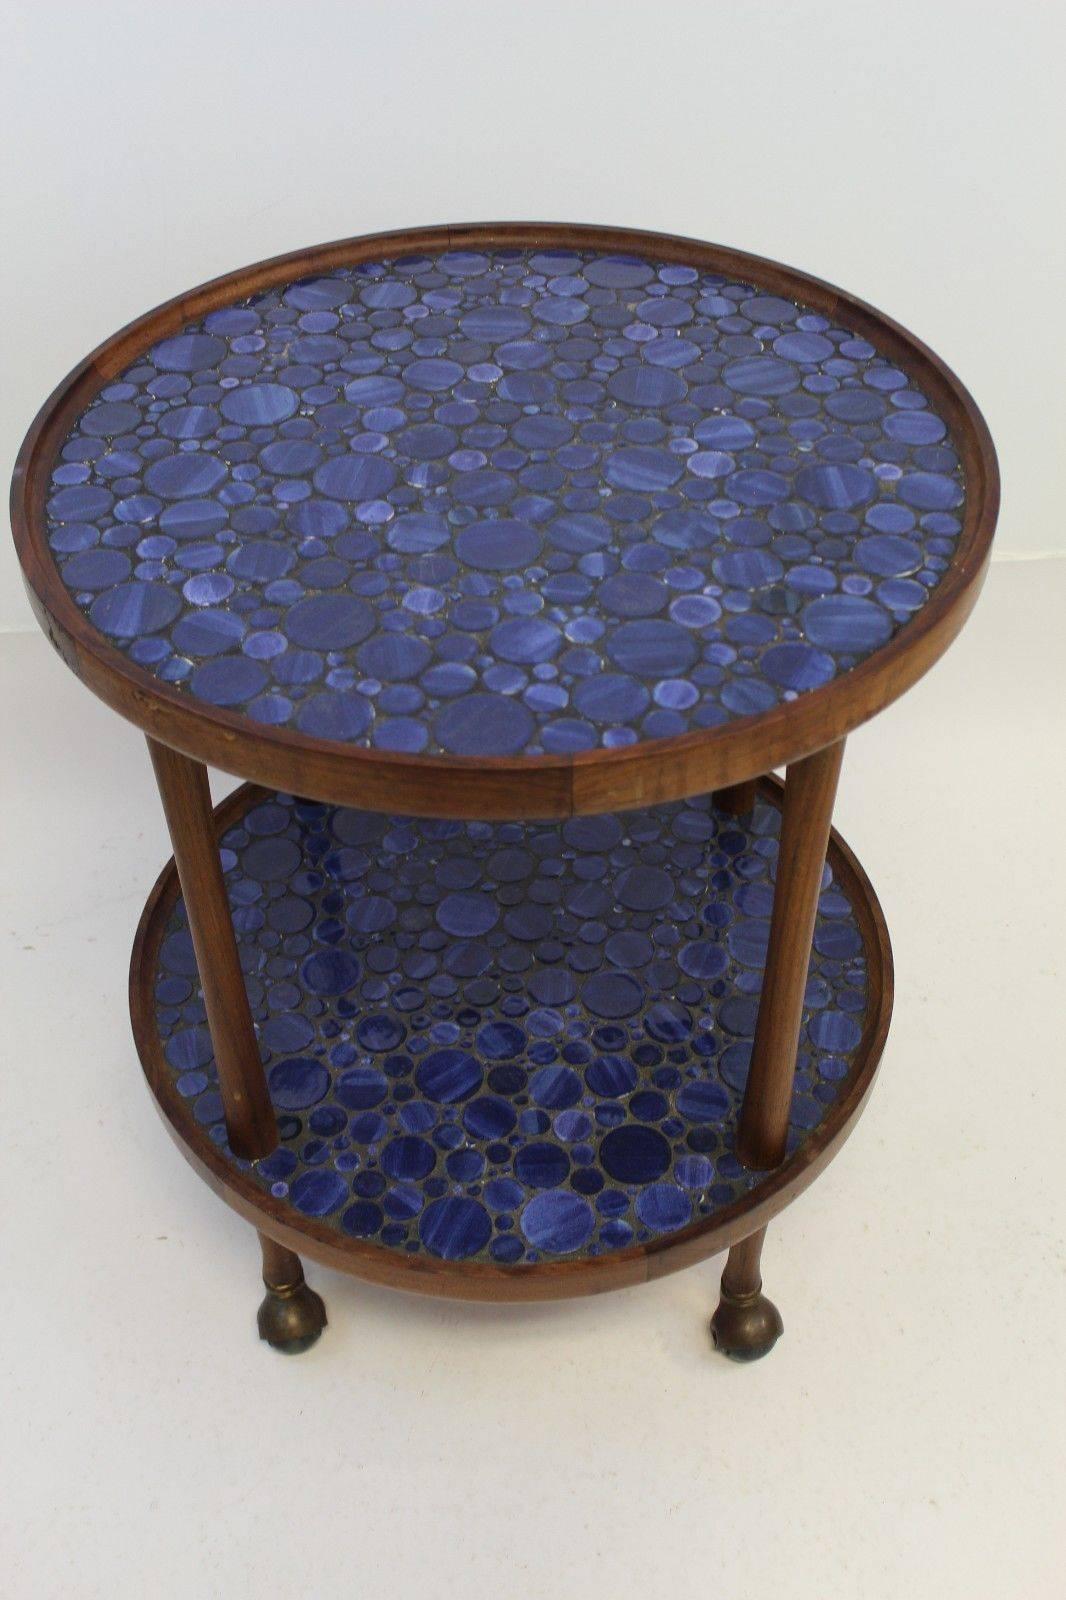 Rare vibrant blue tile, two-tiered rolling table, or bar cart, by Martz. In excellent condition. The dimensions are 24